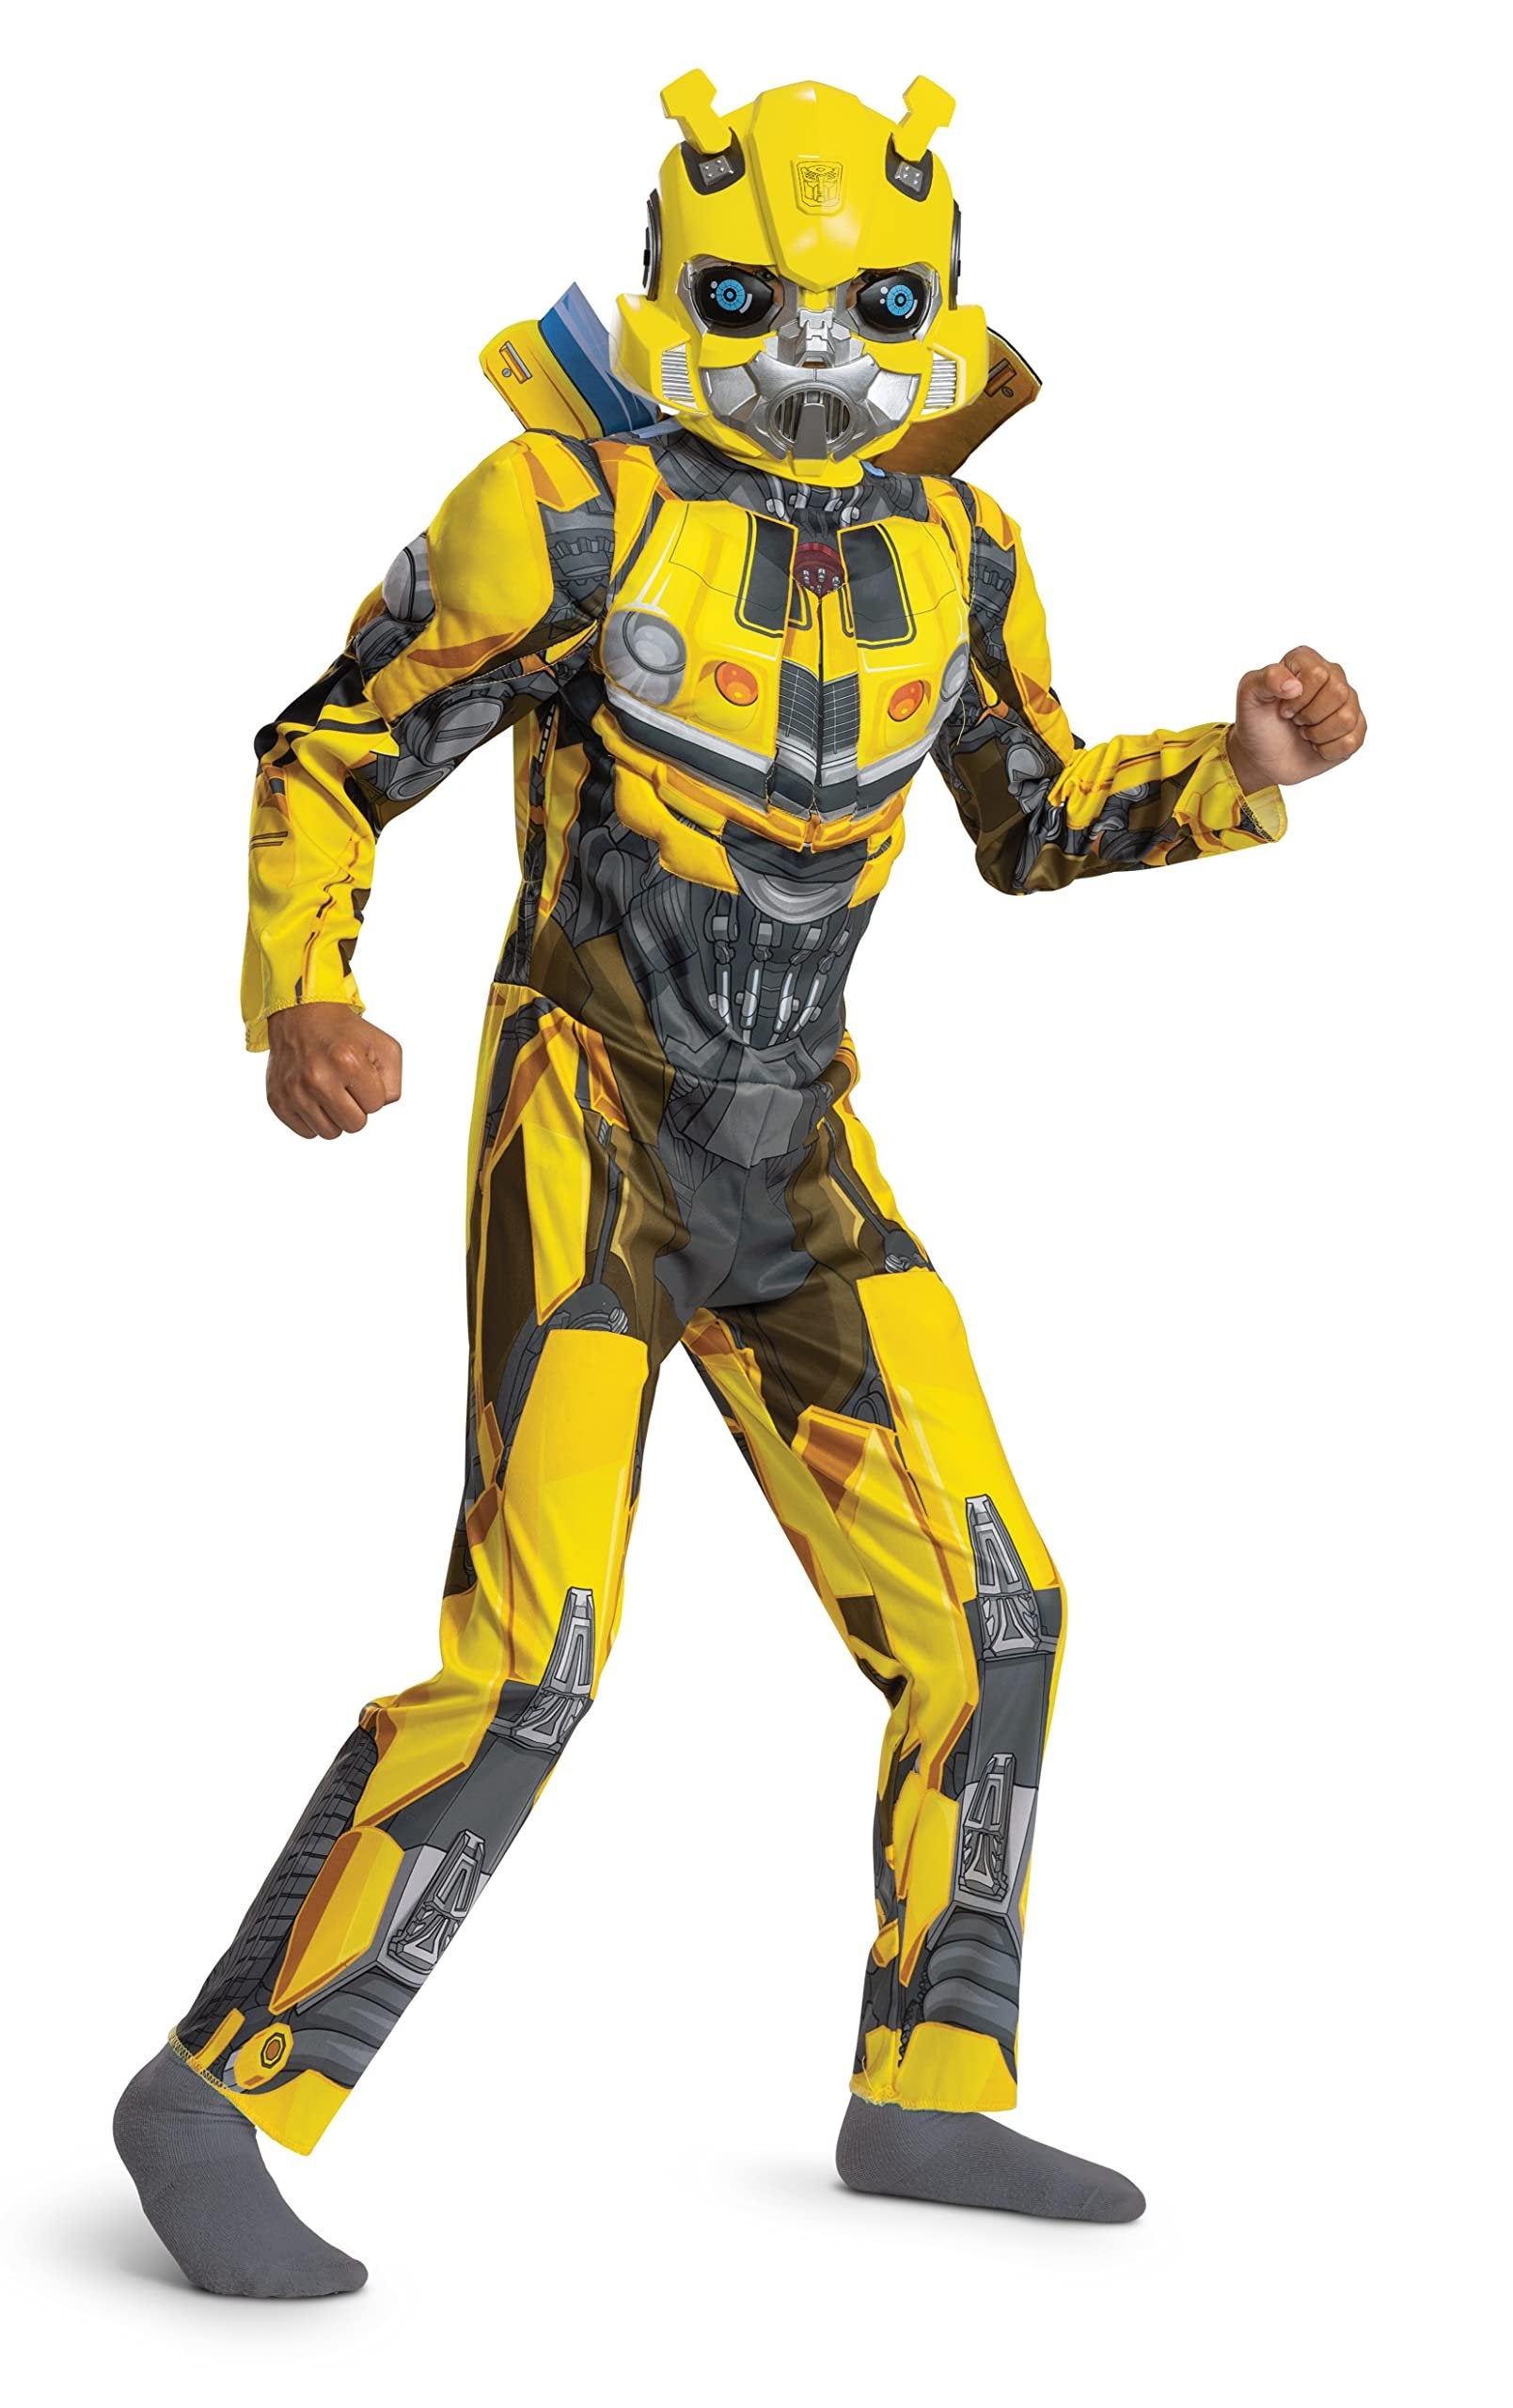 Disguise Bumblebee Muscle Costume for Kids, Official Transformers Rise of the Beasts Padded Costume and Mask, Size (7-8)